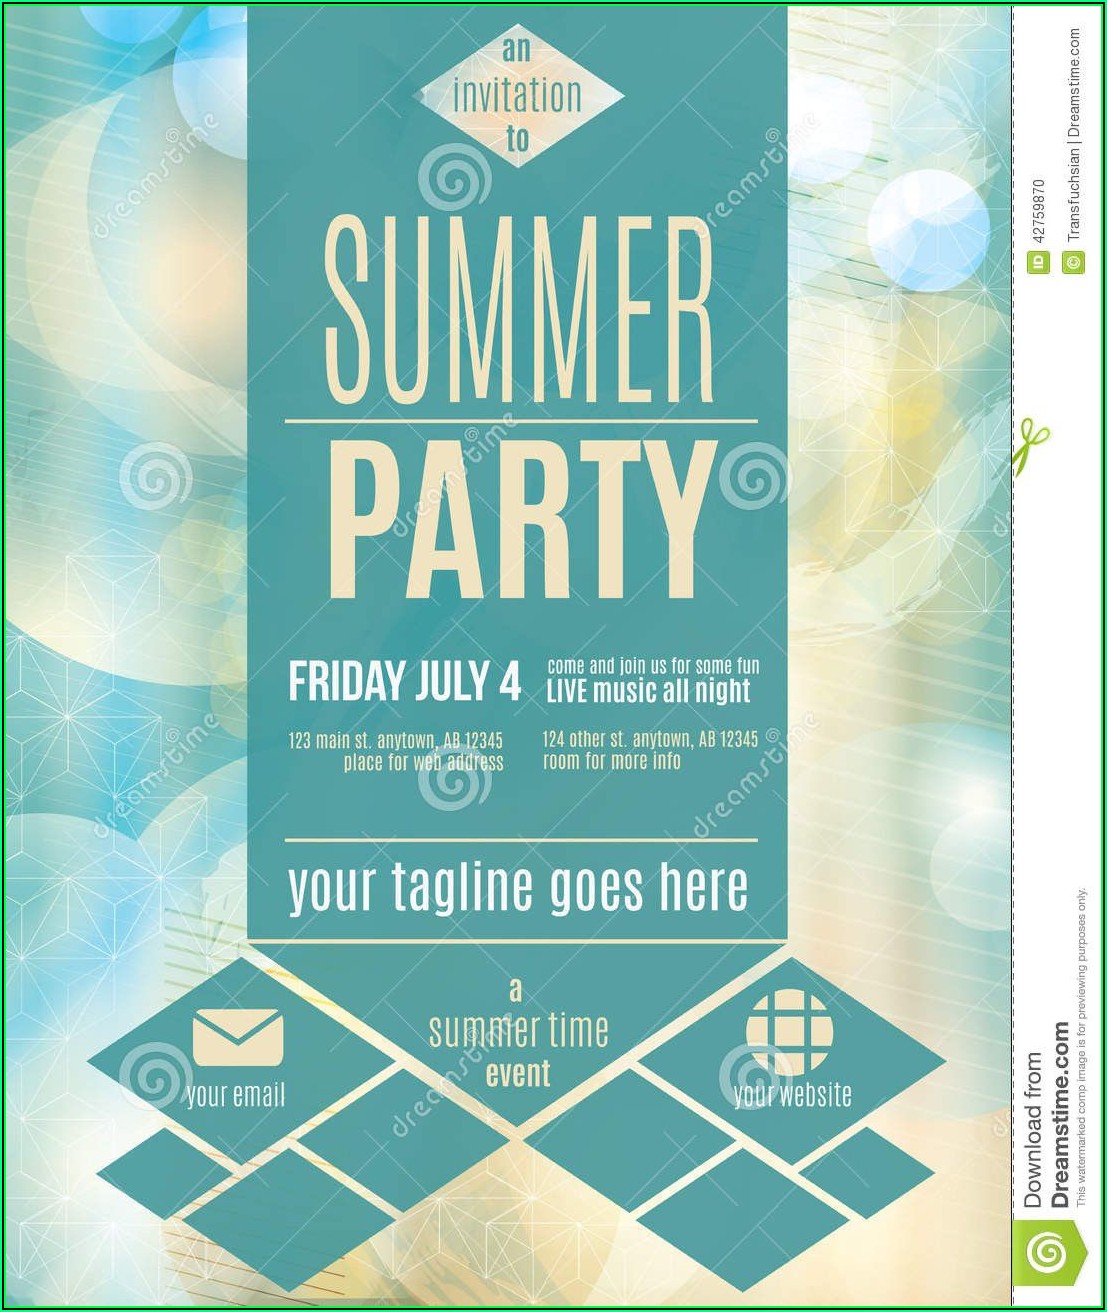 Party Invitation Flyer Template Free